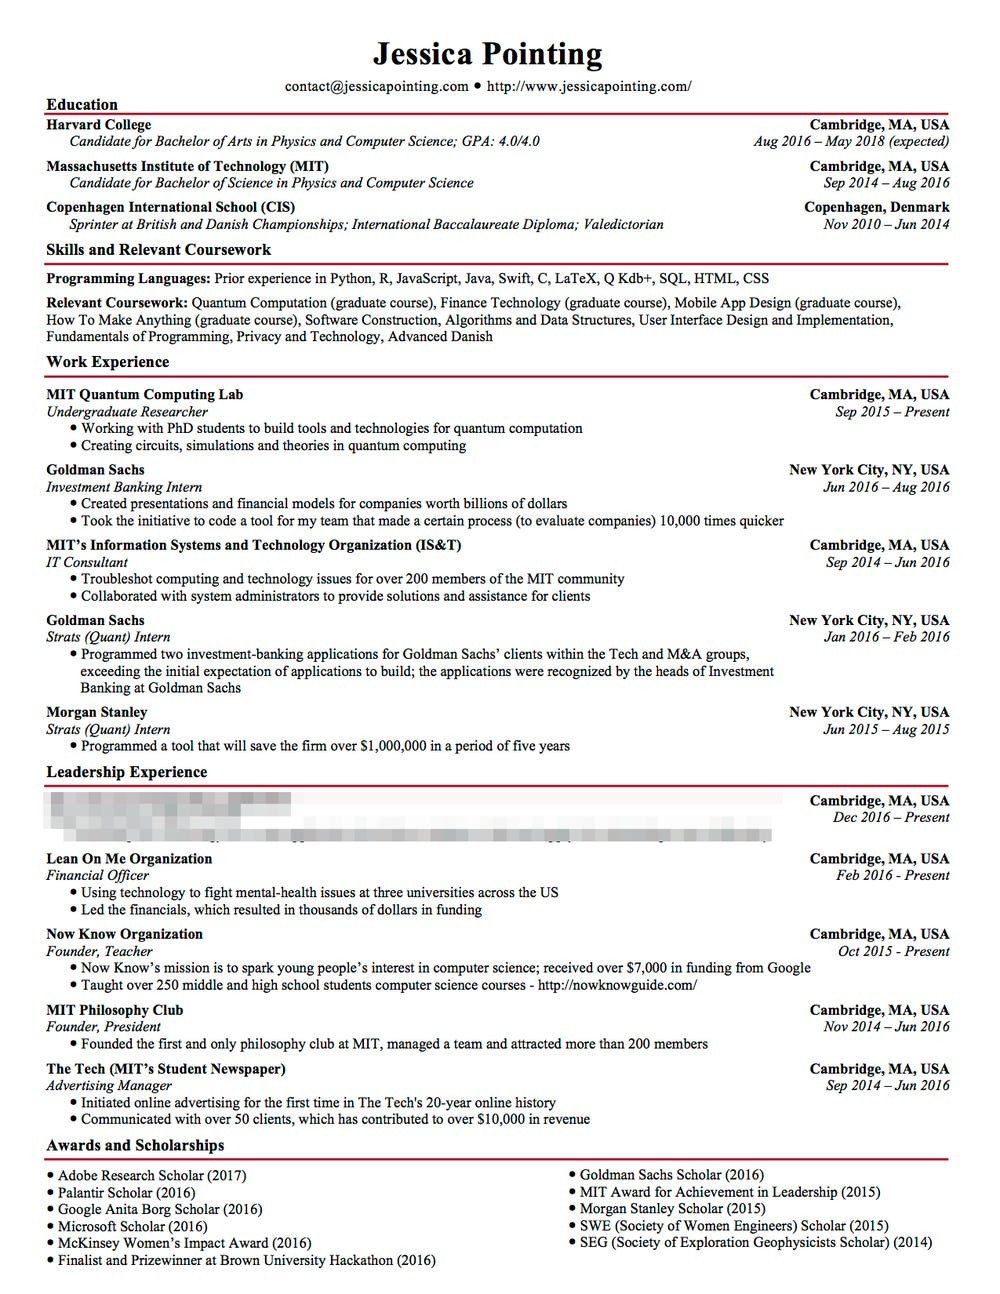 Sample Resume Finance Internship College Student Excellent RÃ©sumÃ© Example for Tech, Consulting, Finance Internships